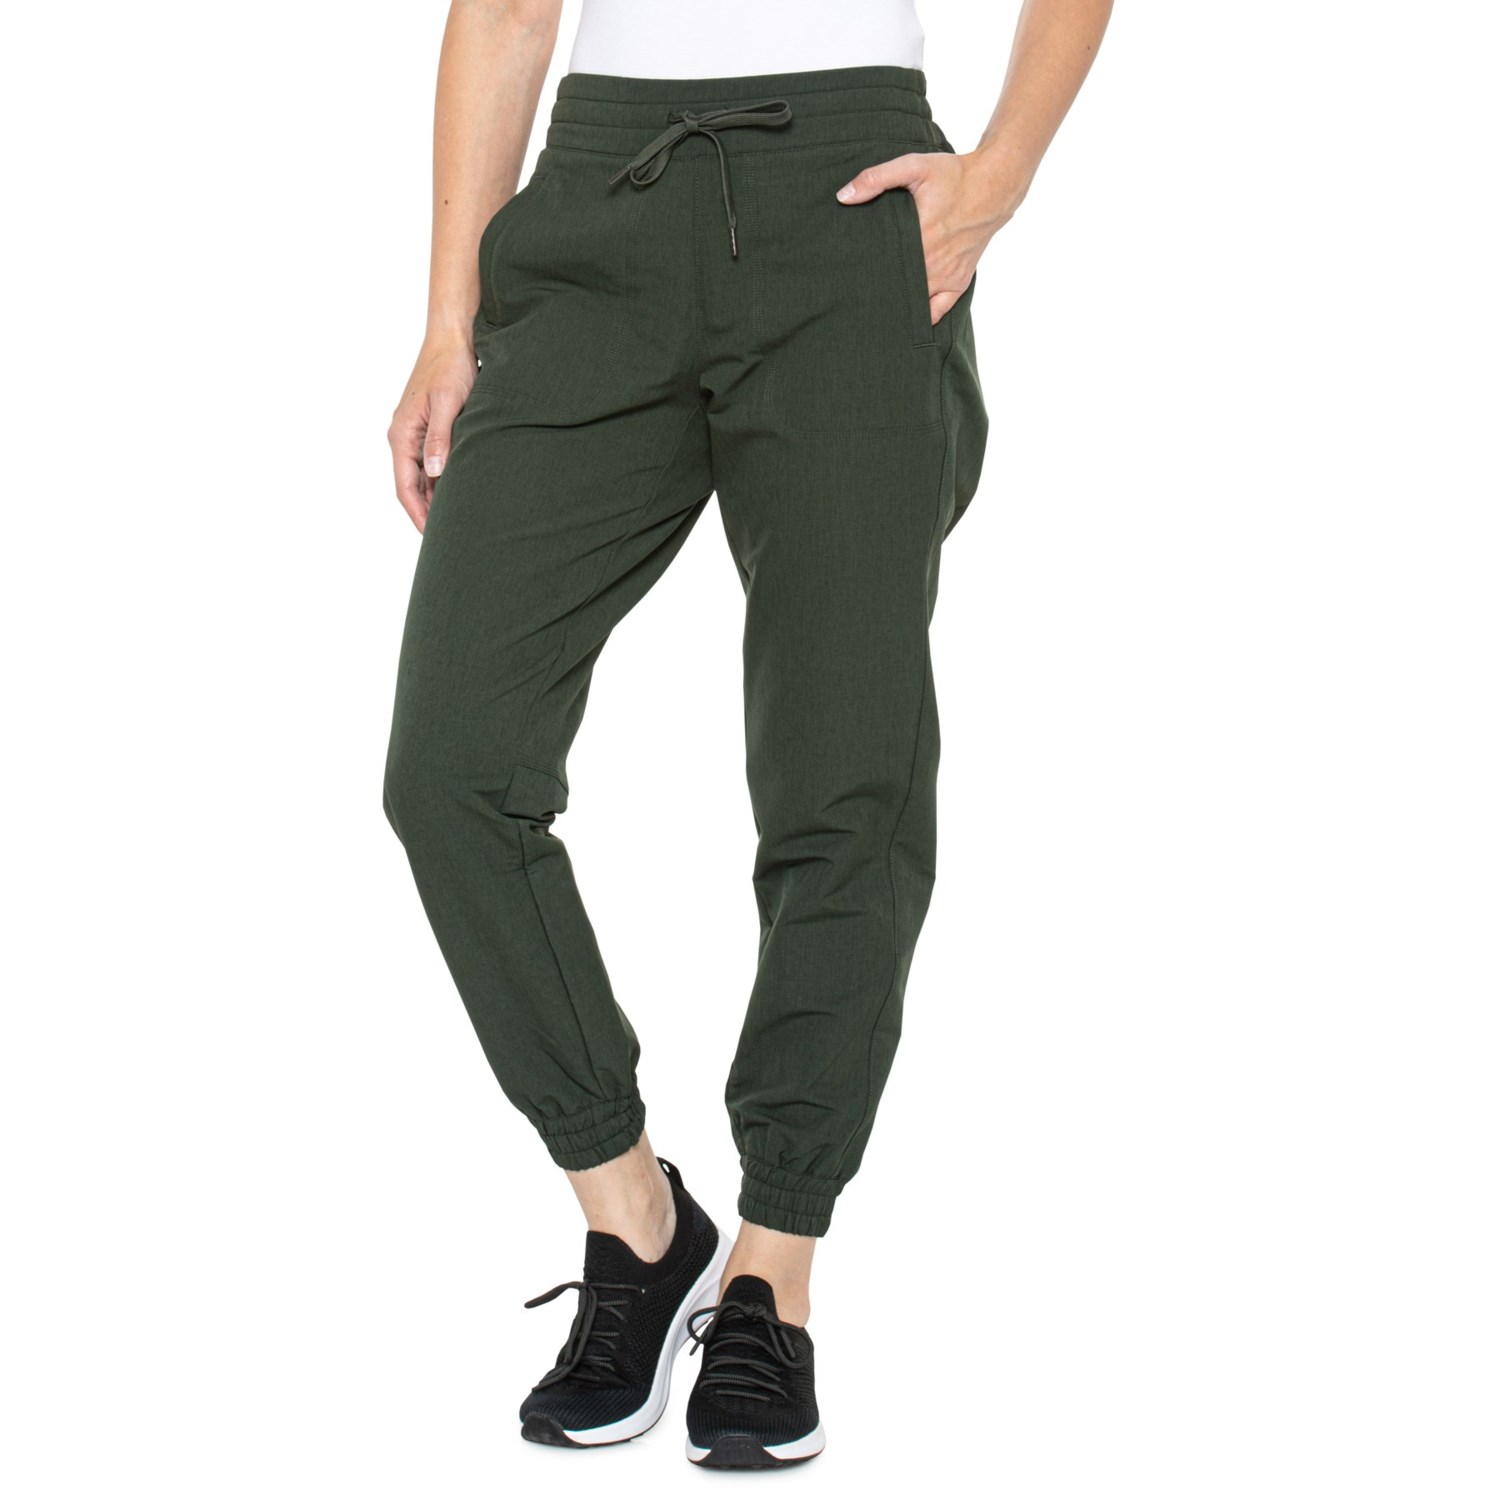 Kyodan Outdoor Lined Woven Pants (For Women) - Save 59%